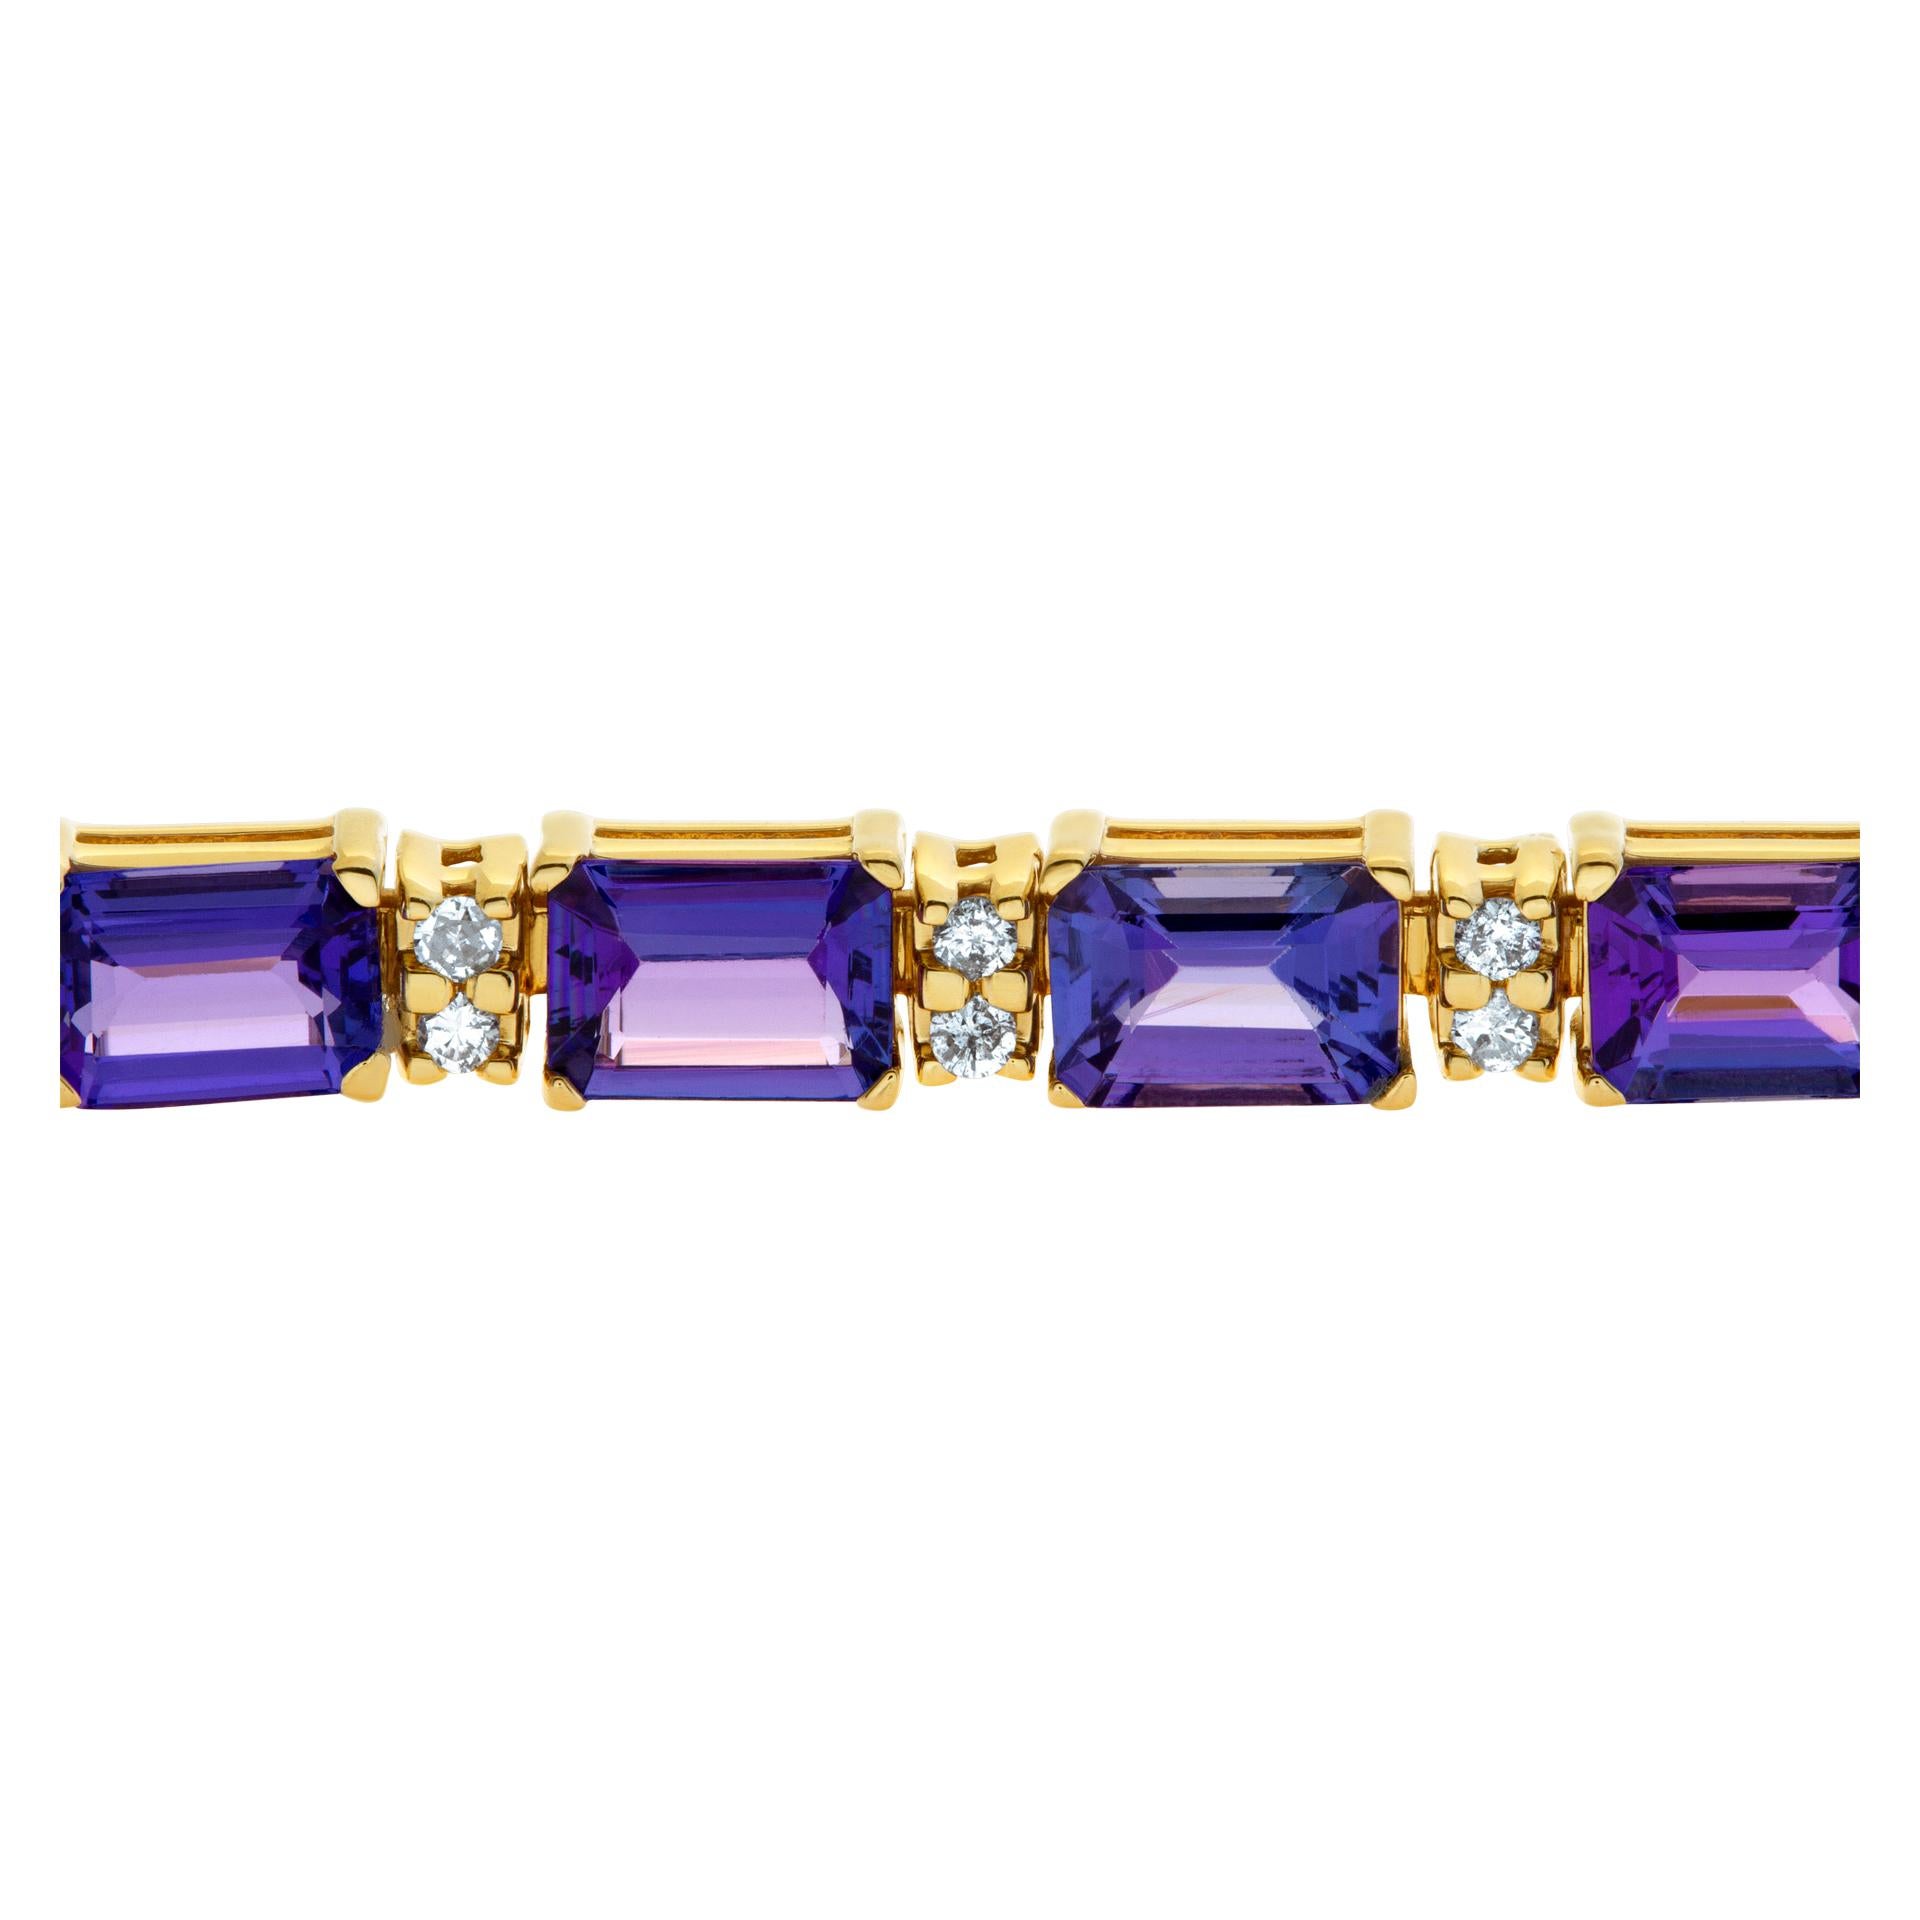 14k bracelet with 16.8 cts Emerald cut Tanzanite and 8 carats full cut round brilliant diamonds. 7 inches long x 5mm wide.
